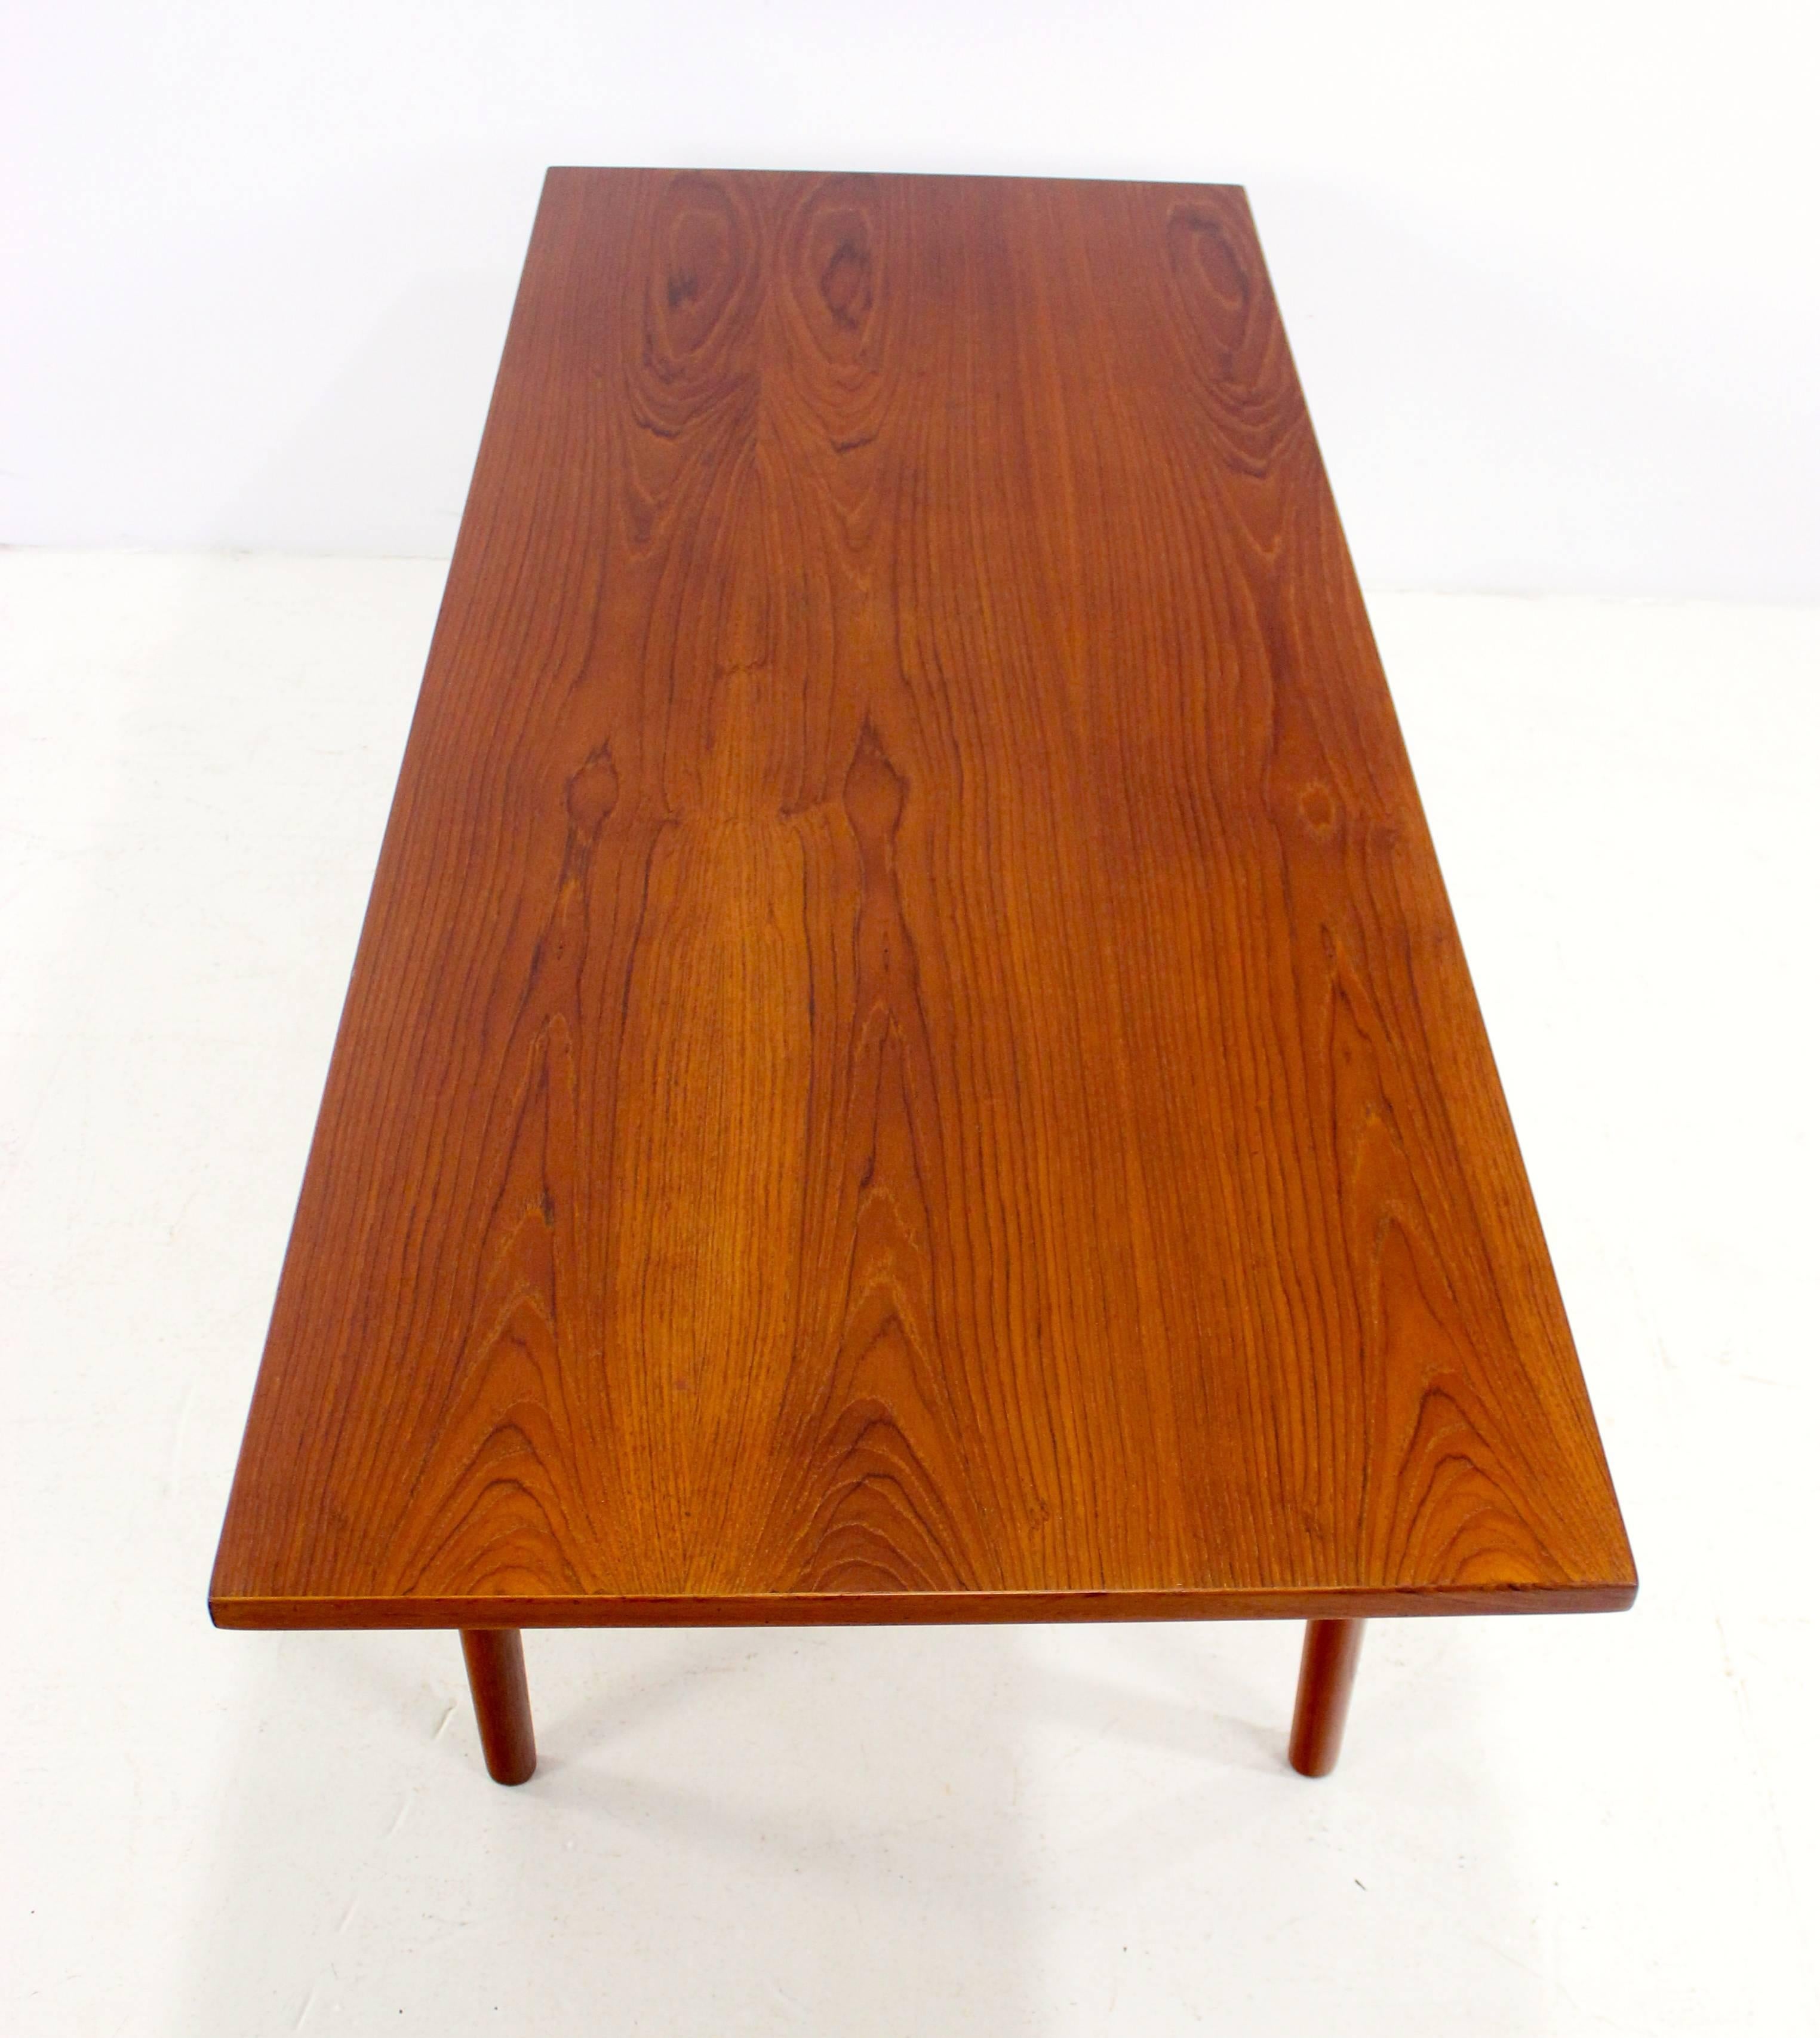 Classic Danish Modern Teak Coffee Table Designed by Grete Jalk In Excellent Condition For Sale In Portland, OR